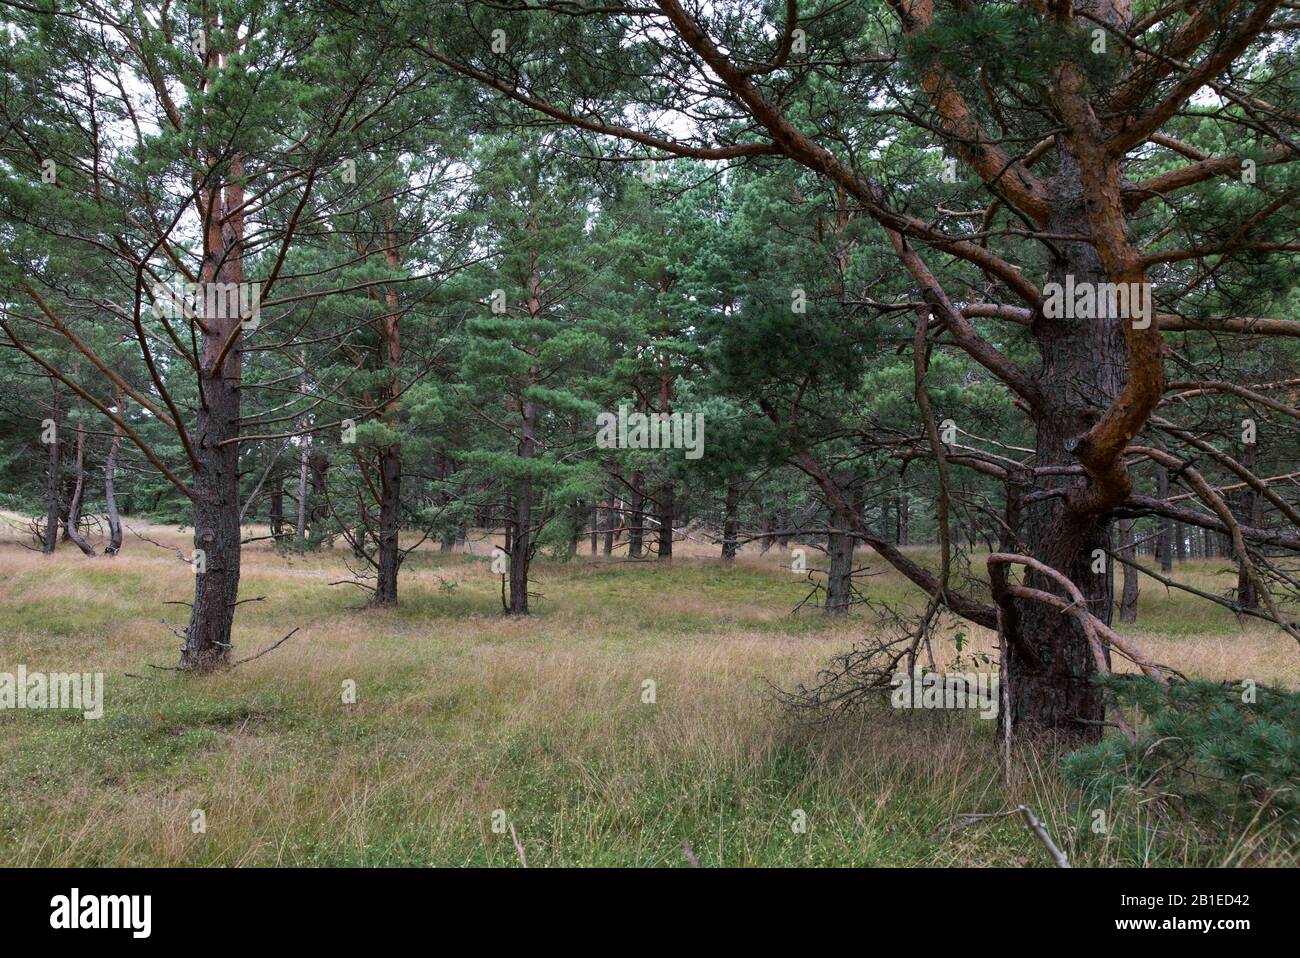 Coastal forest, Curonian Spit National Park, Lithuania Stock Photo